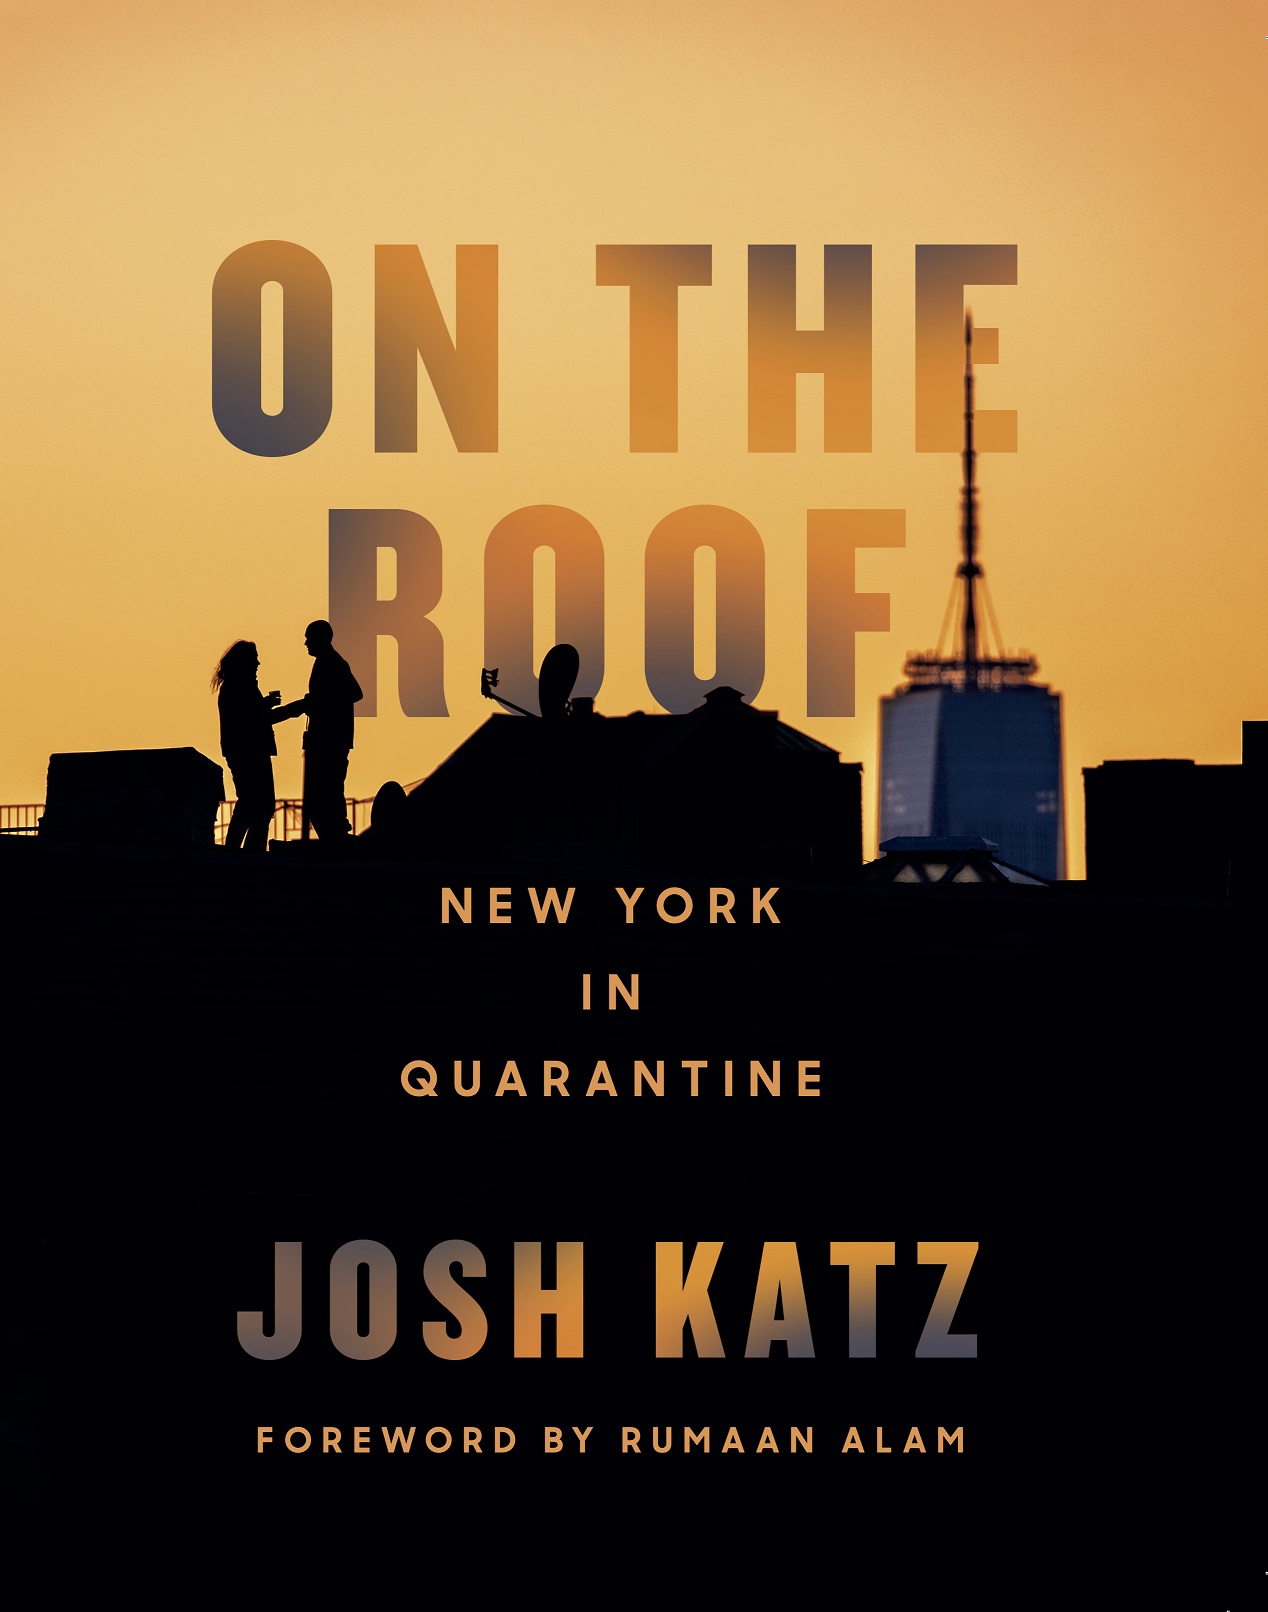 Book Launch: On the Roof by Josh Katz in conversation with Craig Hubert